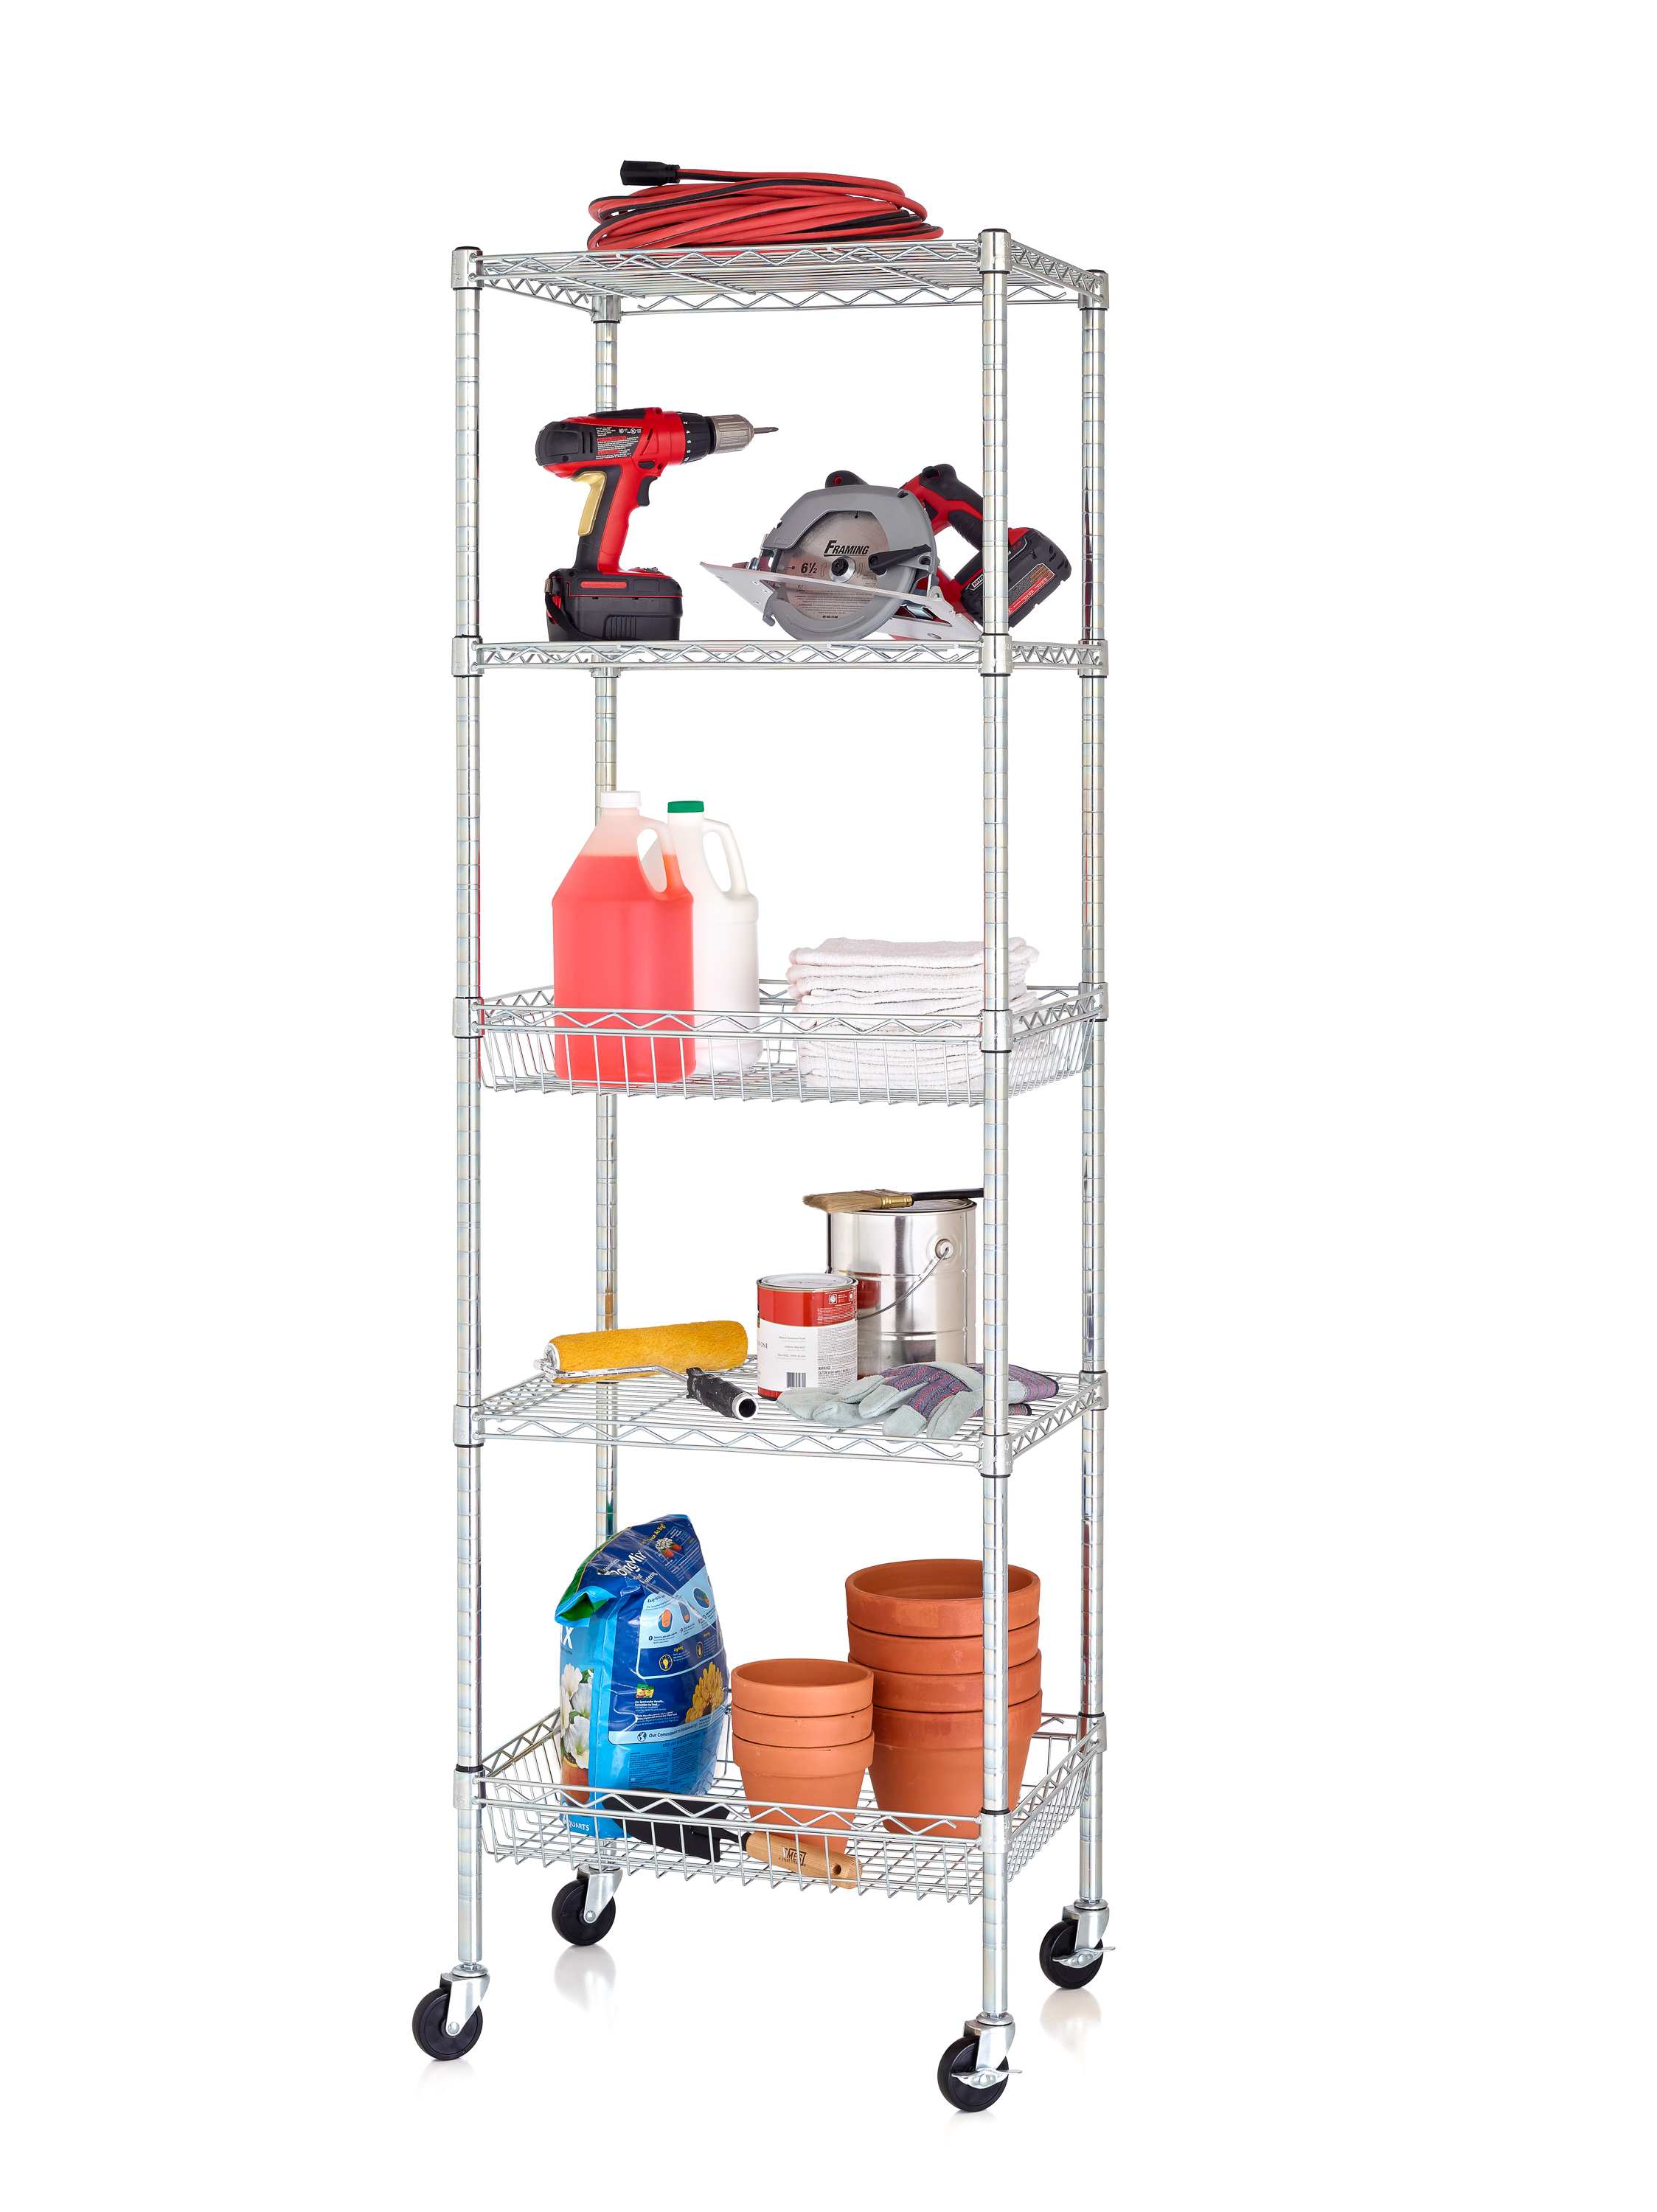 HSS 5 Tier Wire Shelf Unit With 3" Casters 18"Dx24"Wx75" Chrome, Capacity 500 lbs - image 1 of 1